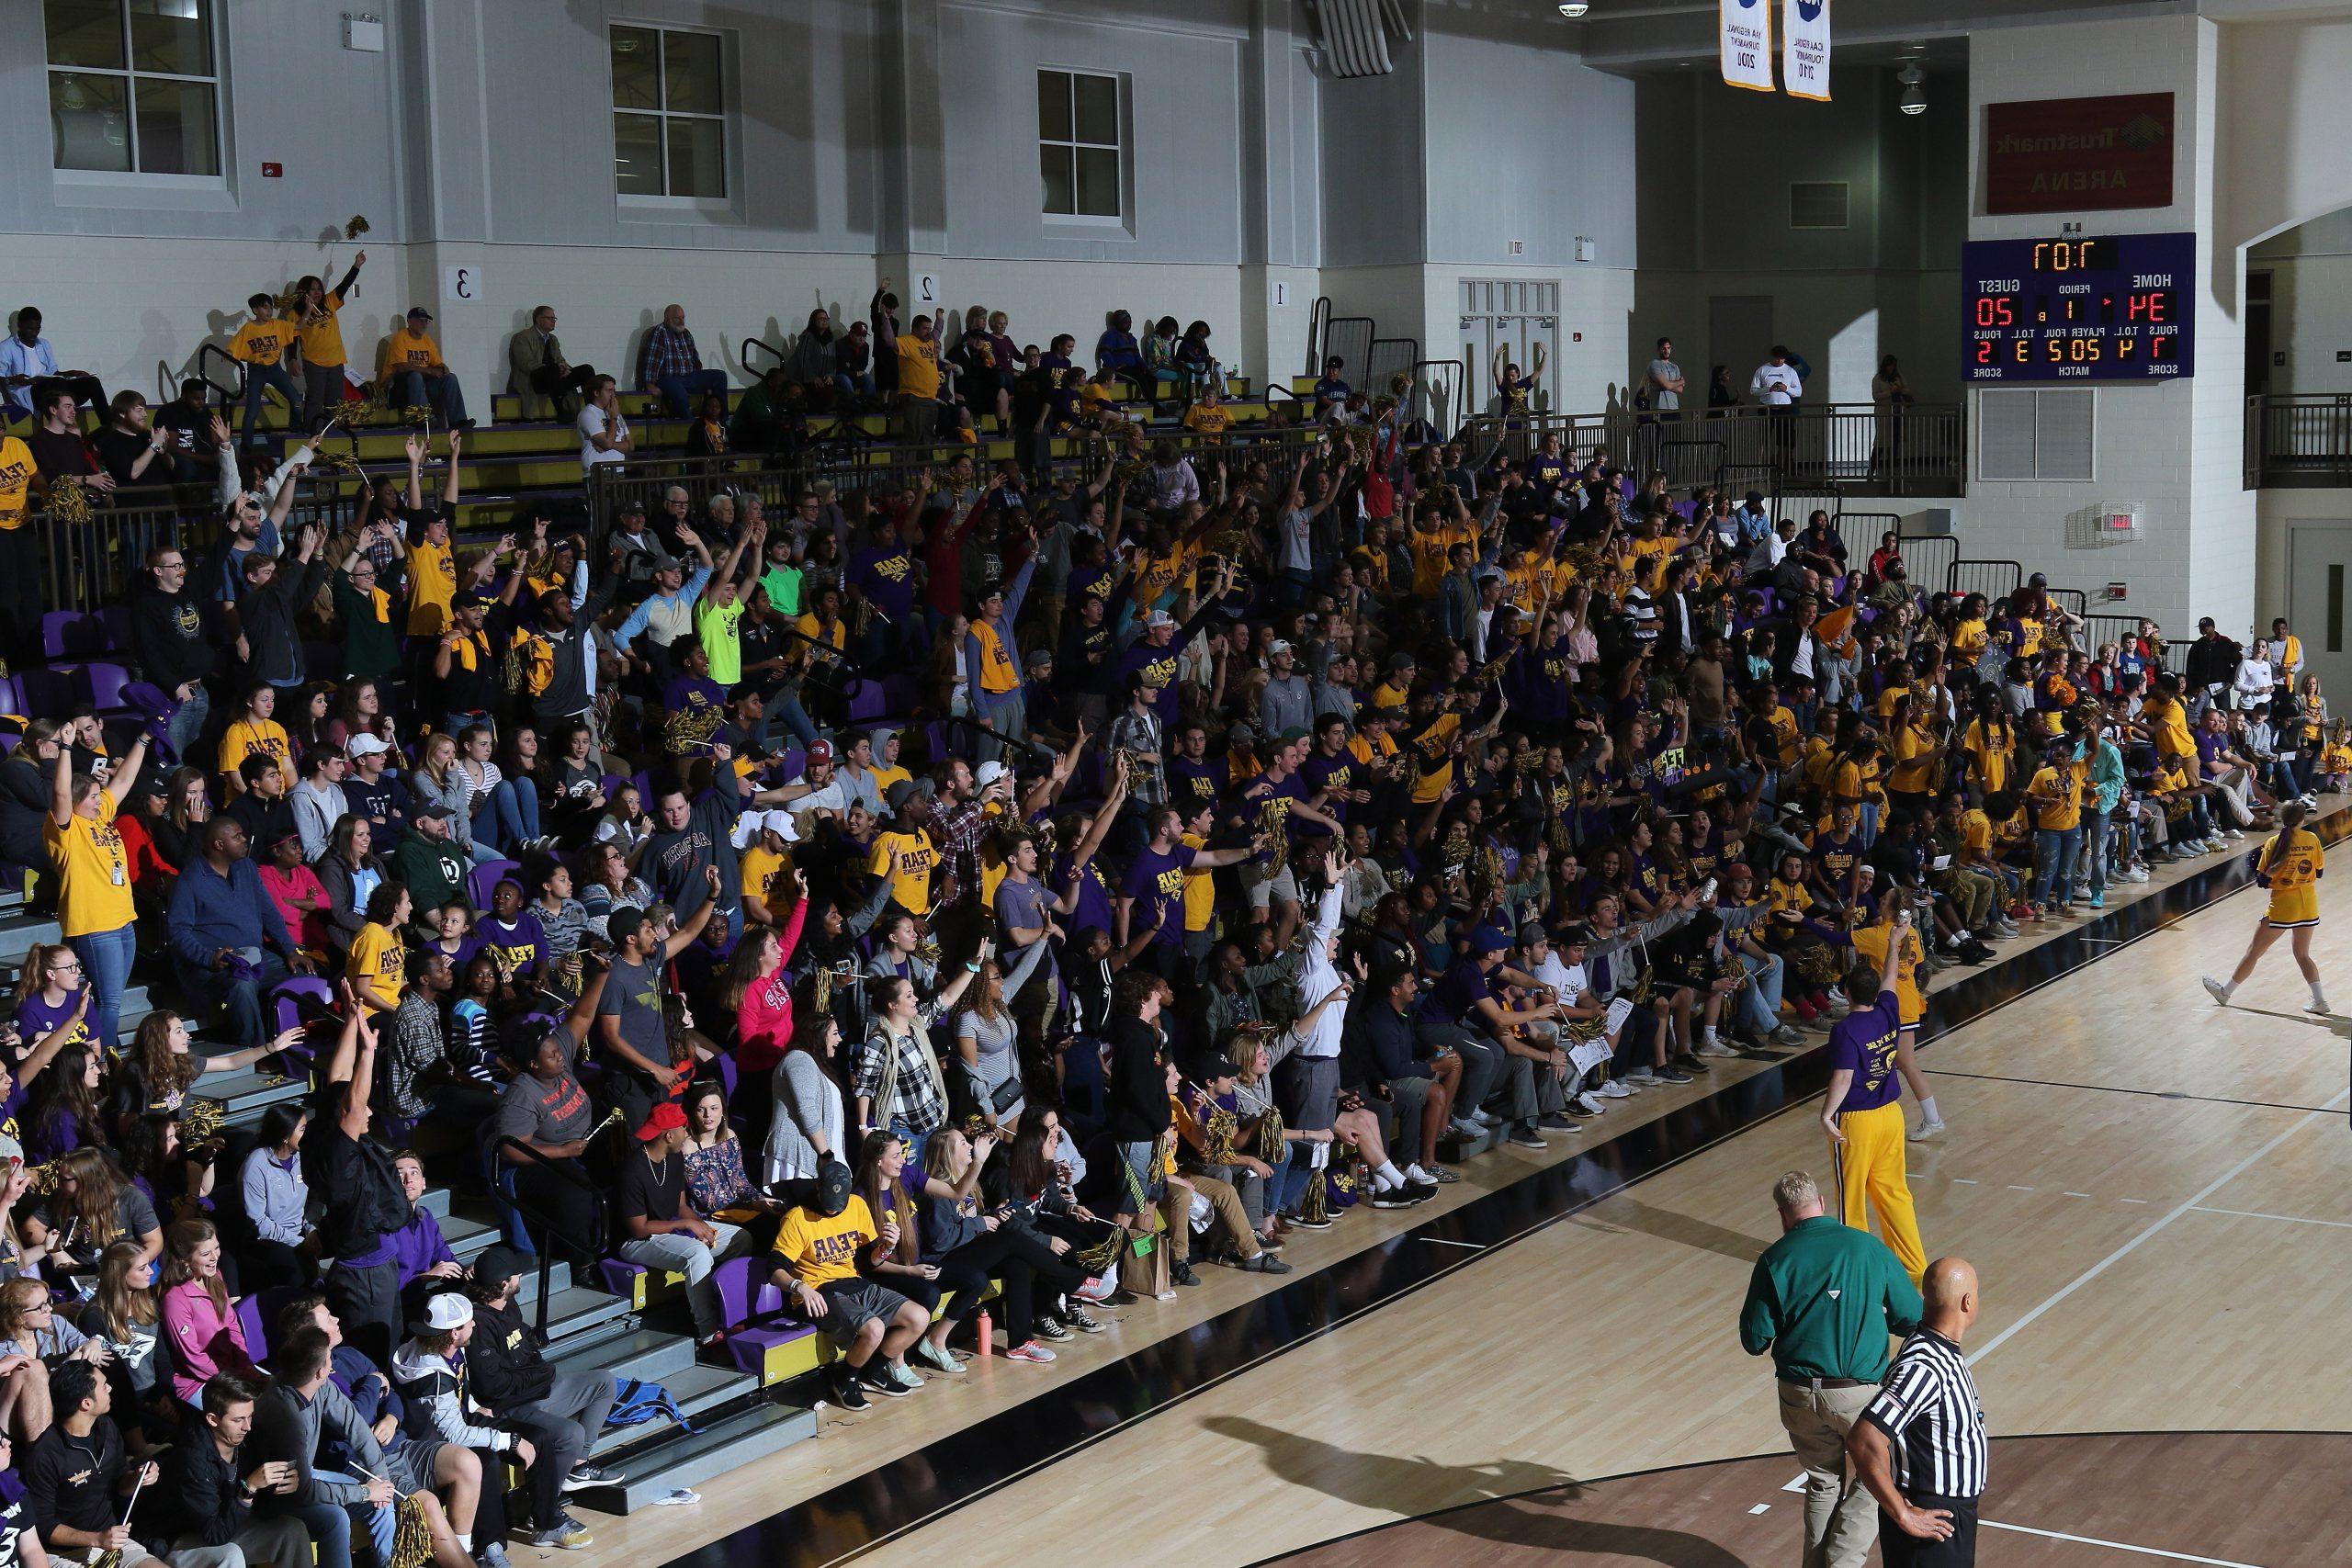 The crowd celebrates during a time out at a University of Montevallo basketball game.